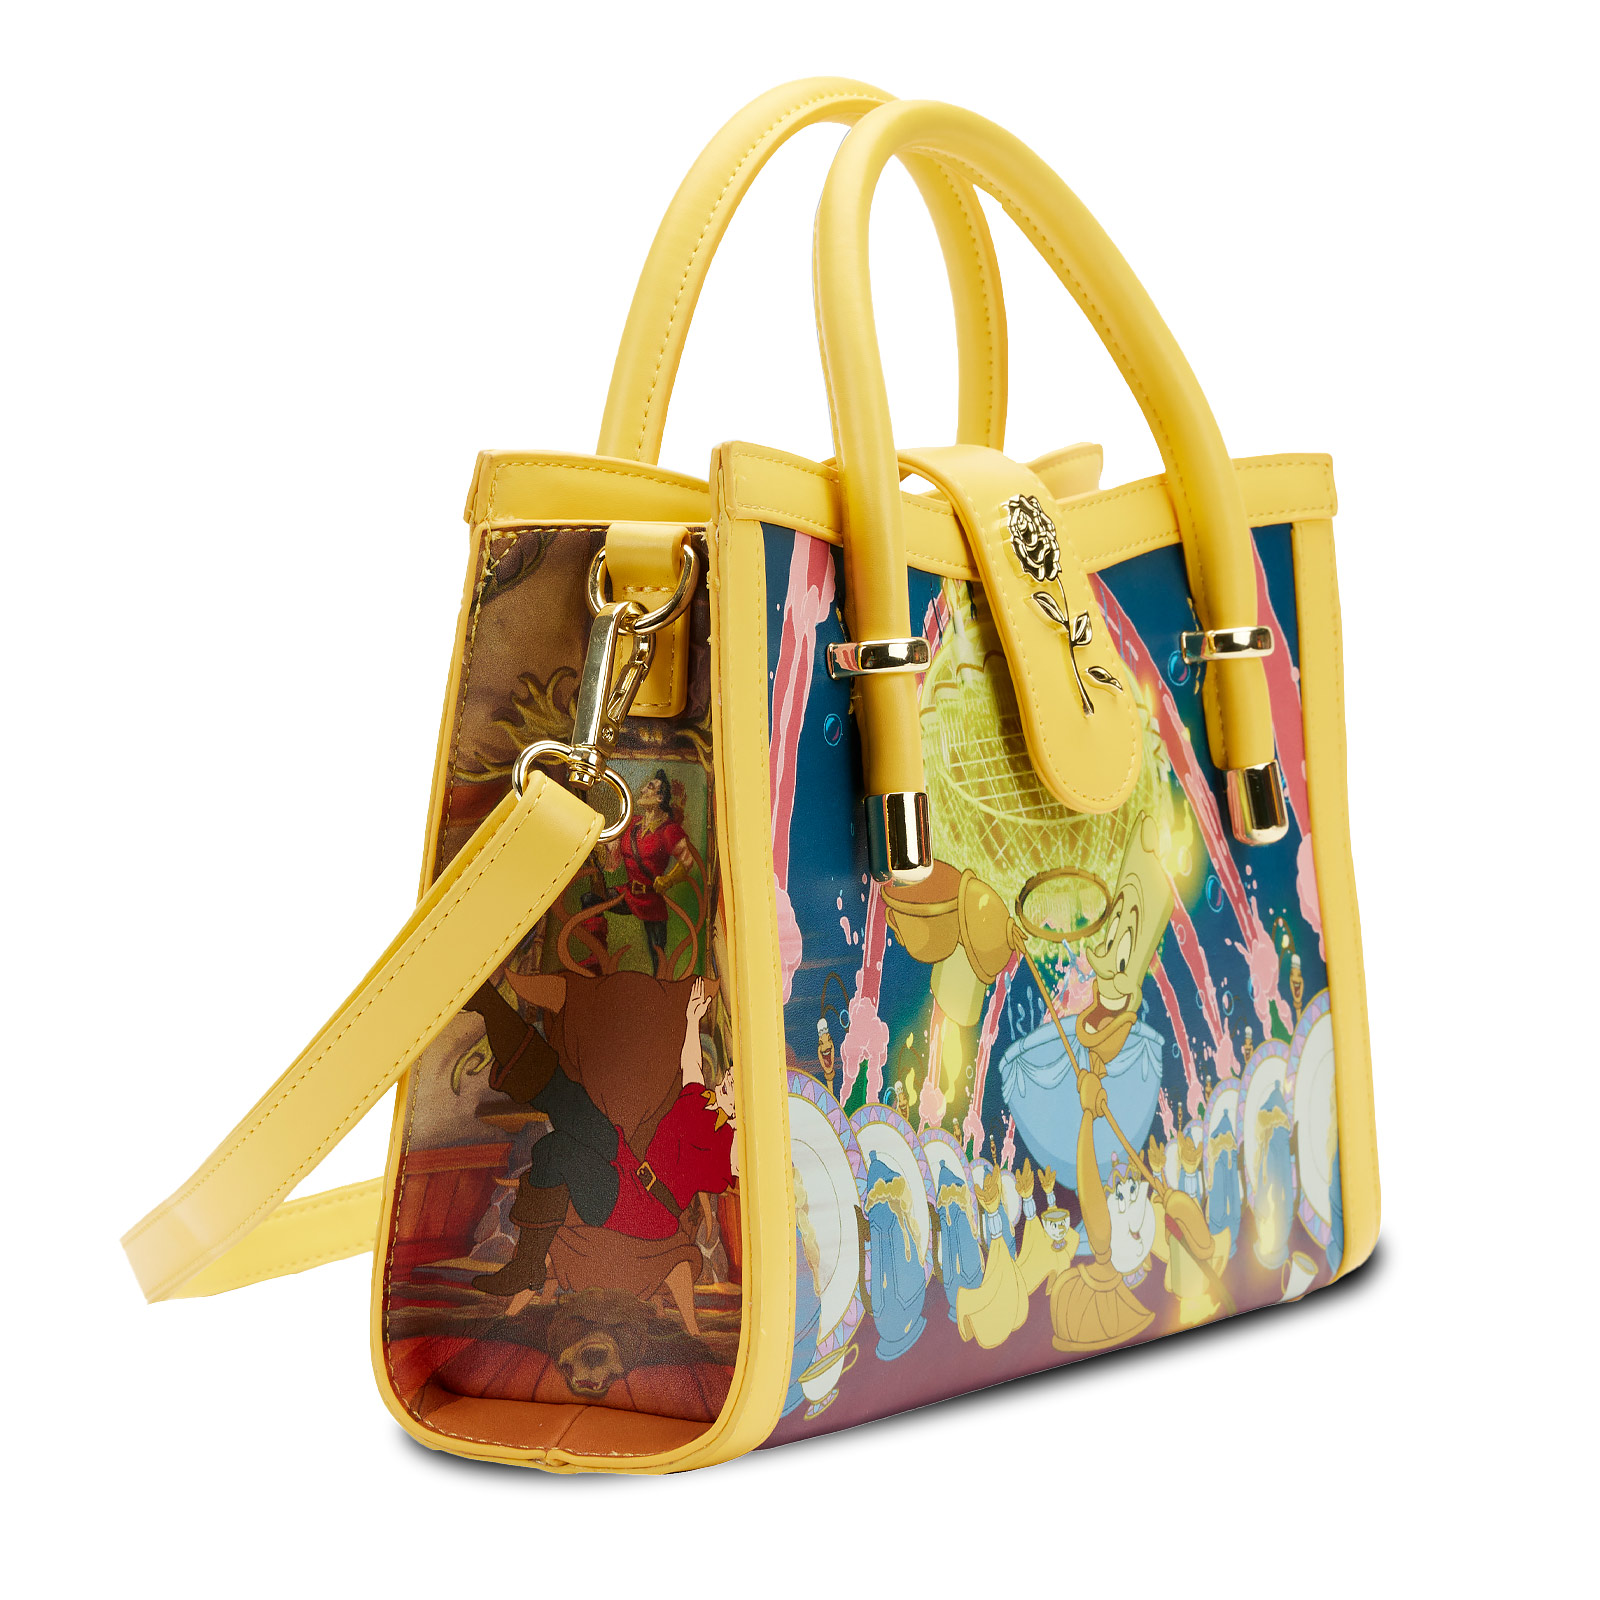 Beauty and the Beast - Belle Crossbody Bag